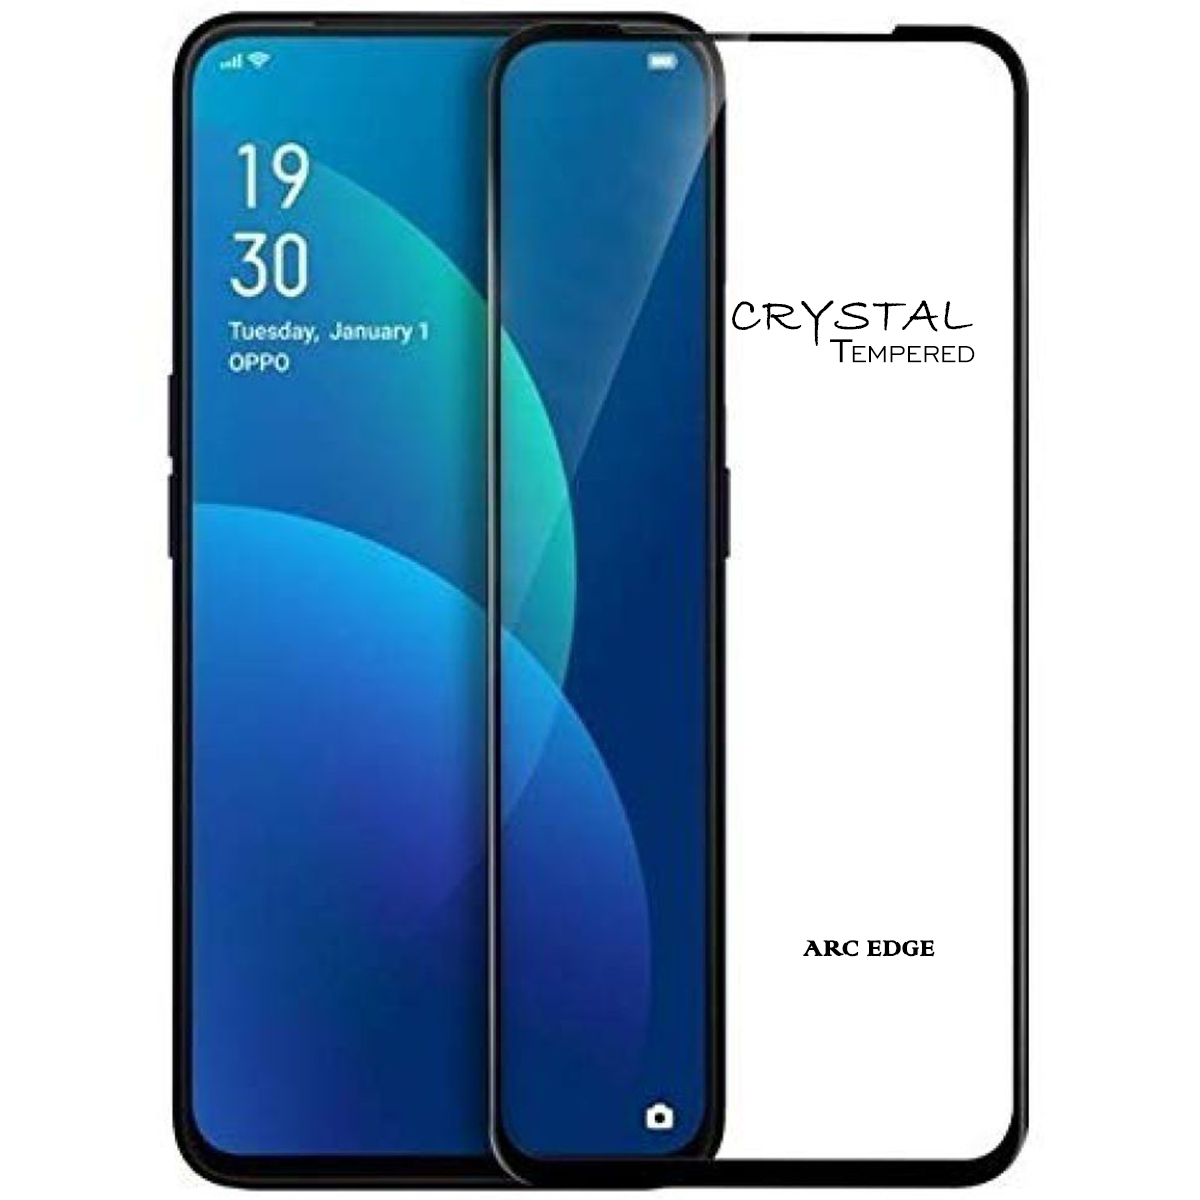 iFix Crystal 5D Tempered Glass for OPPO F11/A9/REALME X2 PRO